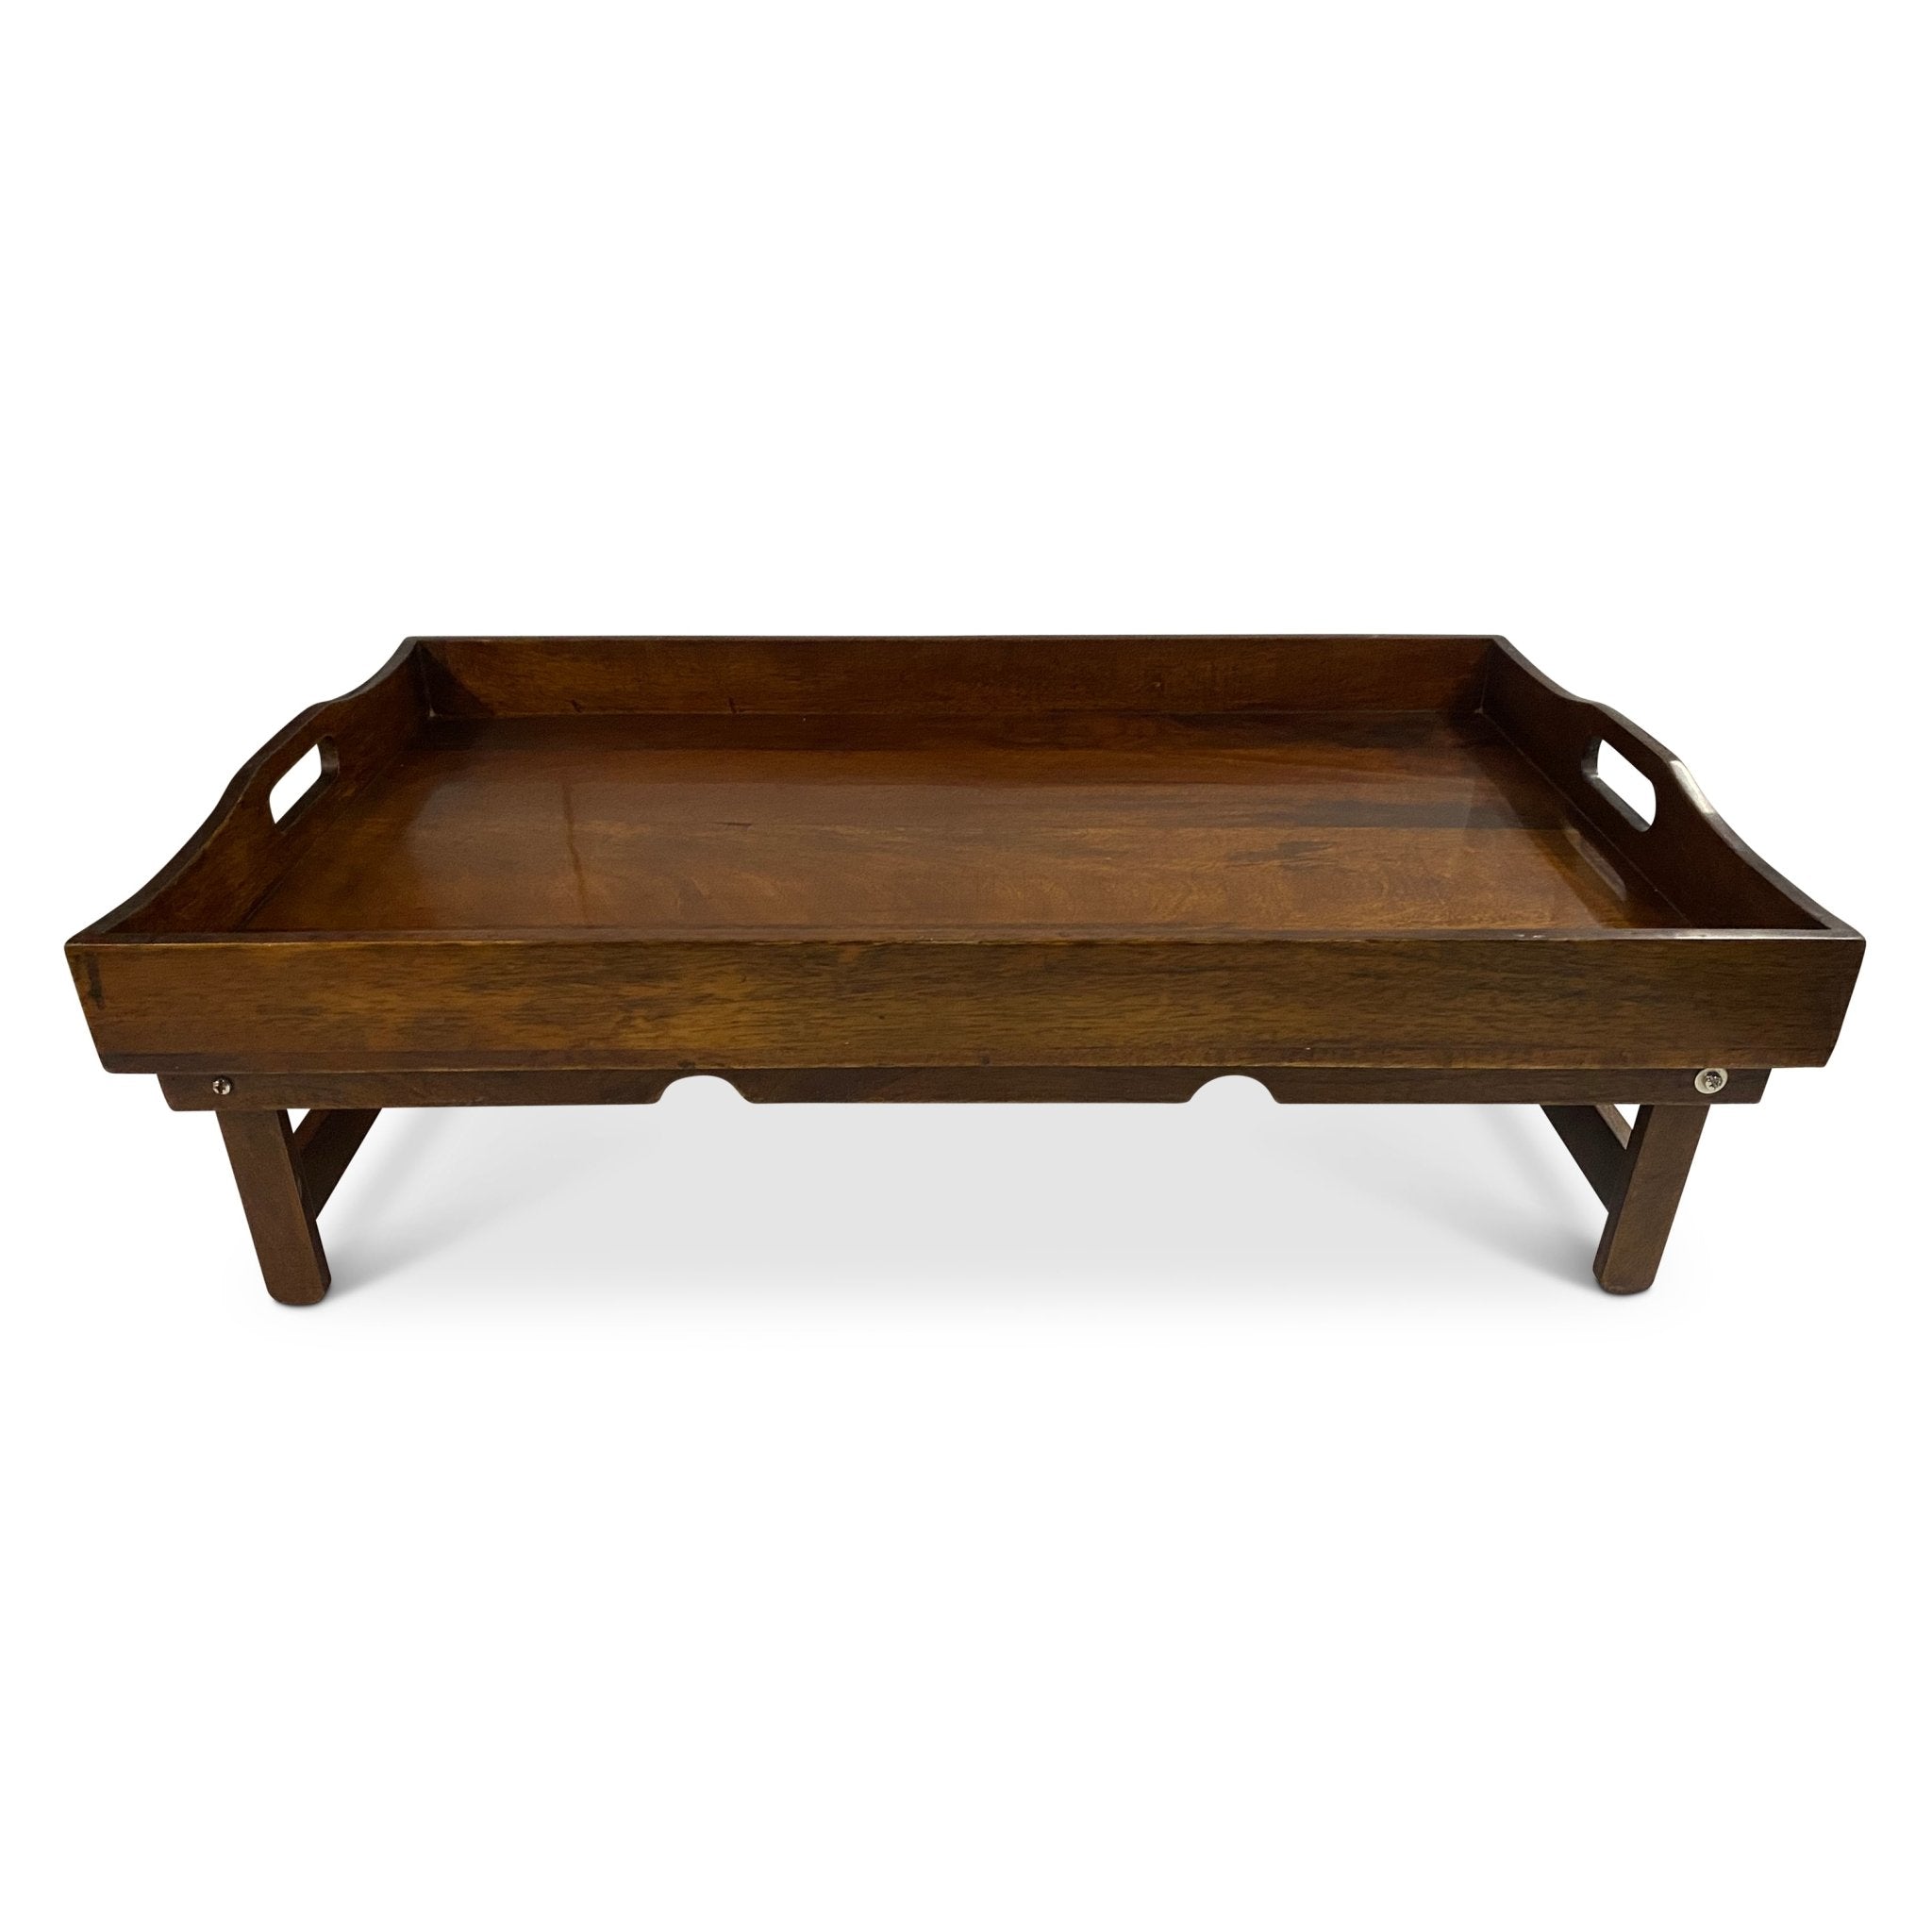 Stateroom Trunk Table Tray - Furniture - Tipplergoods